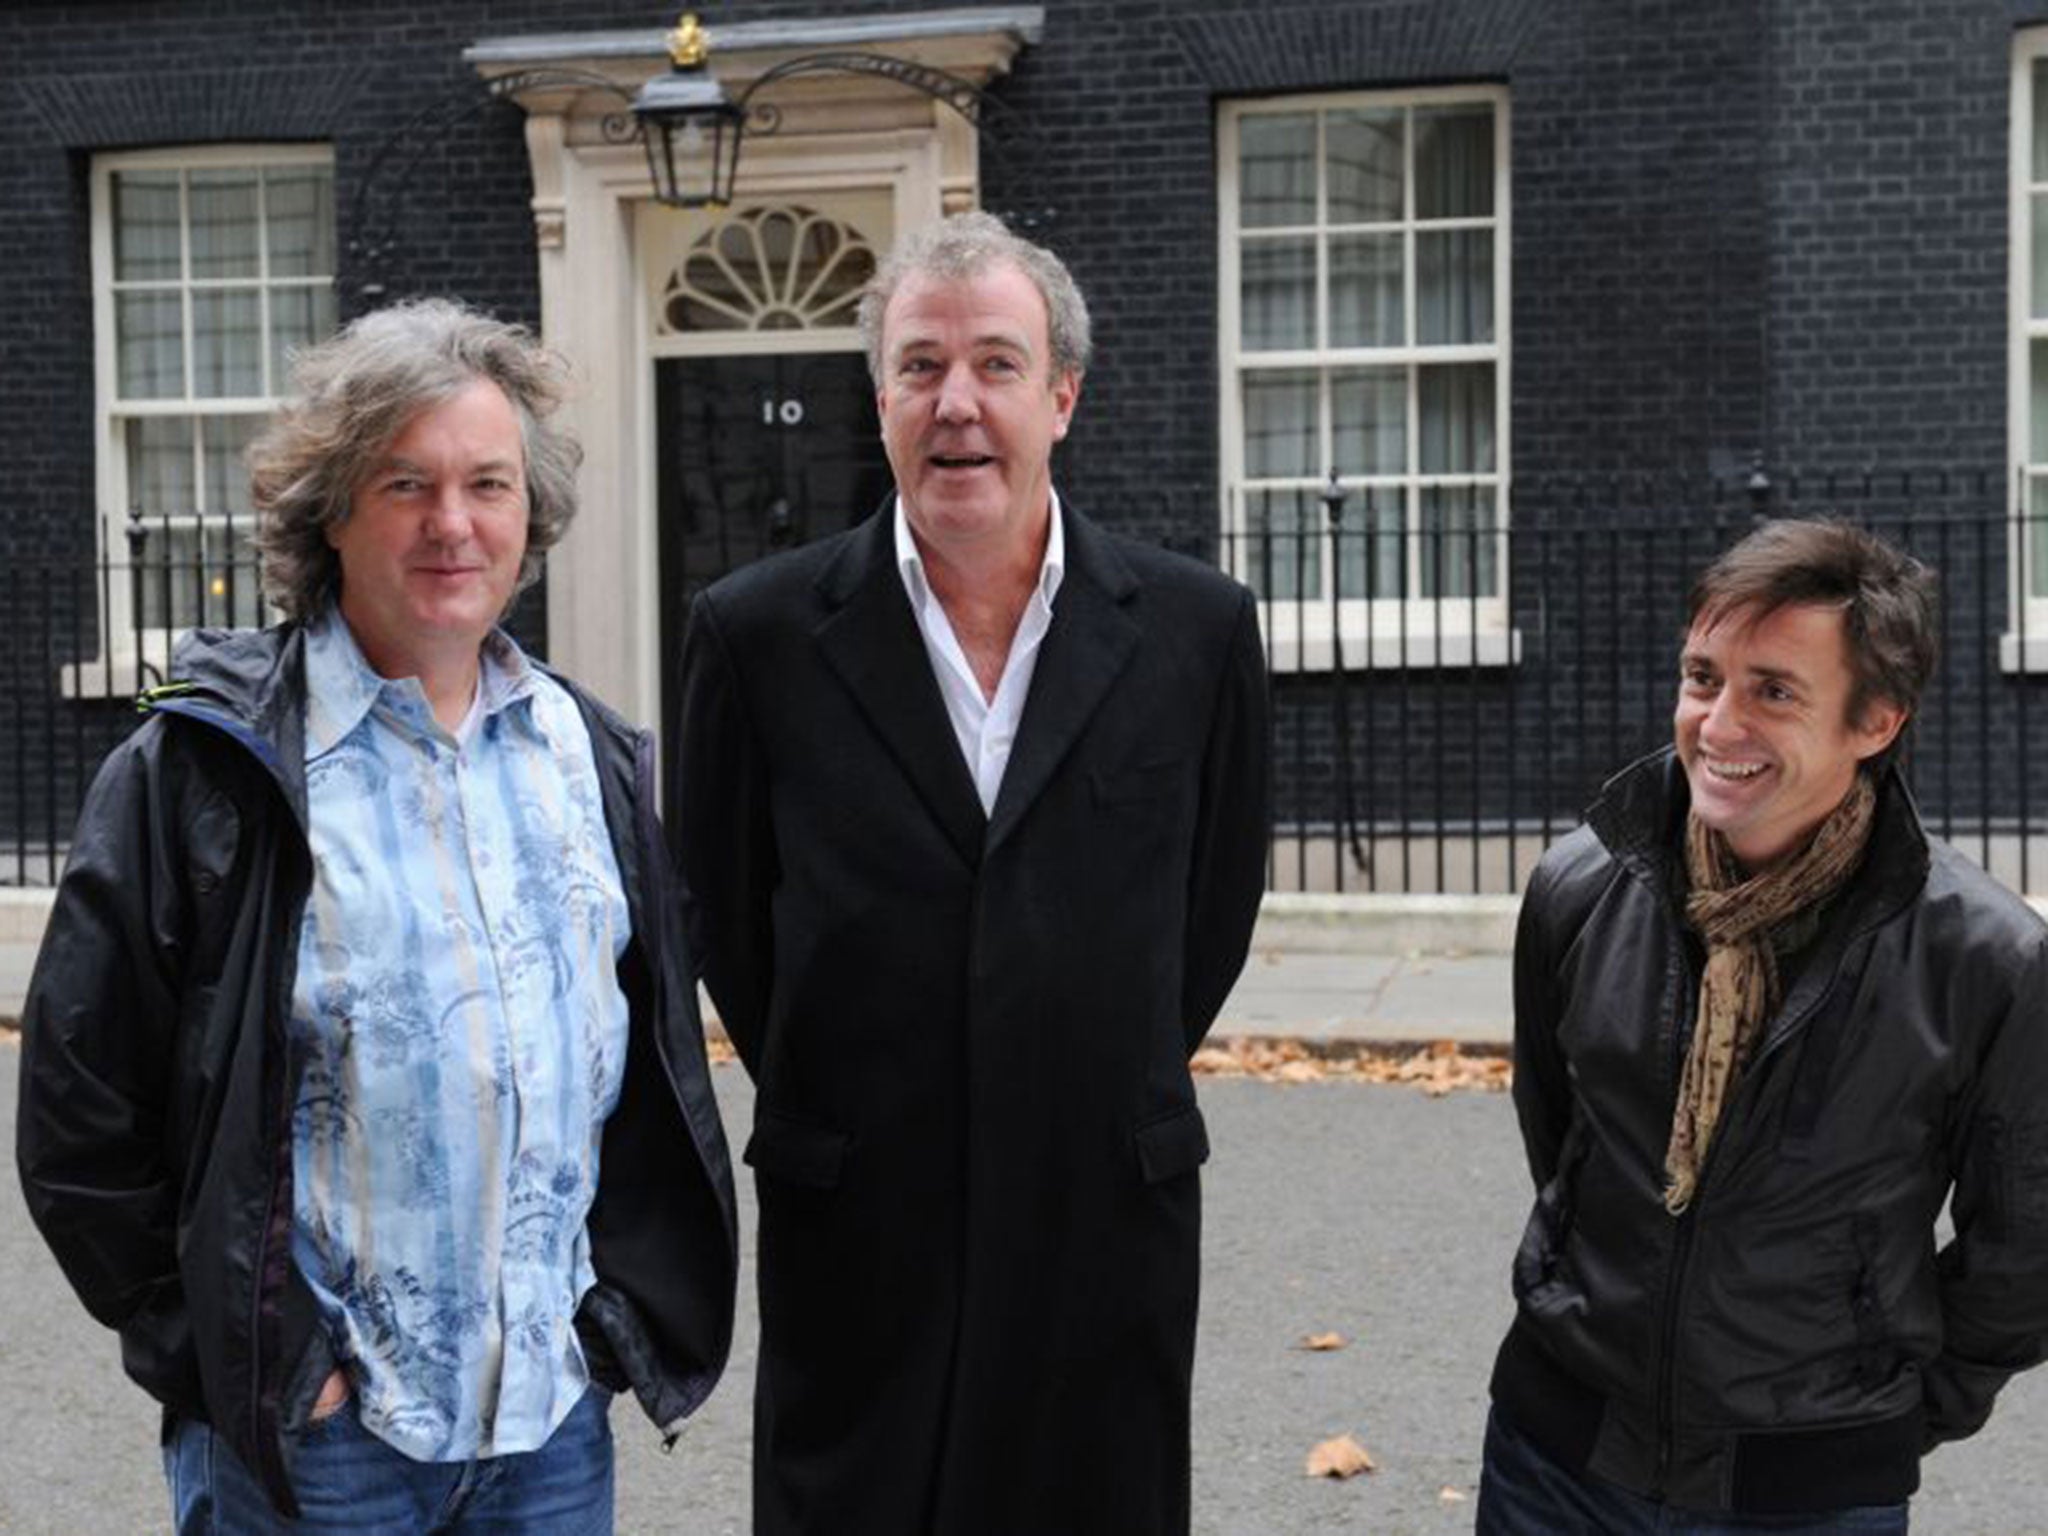 Former Top Gear presenters James May, Jeremy Clarkson and Richard Hammond